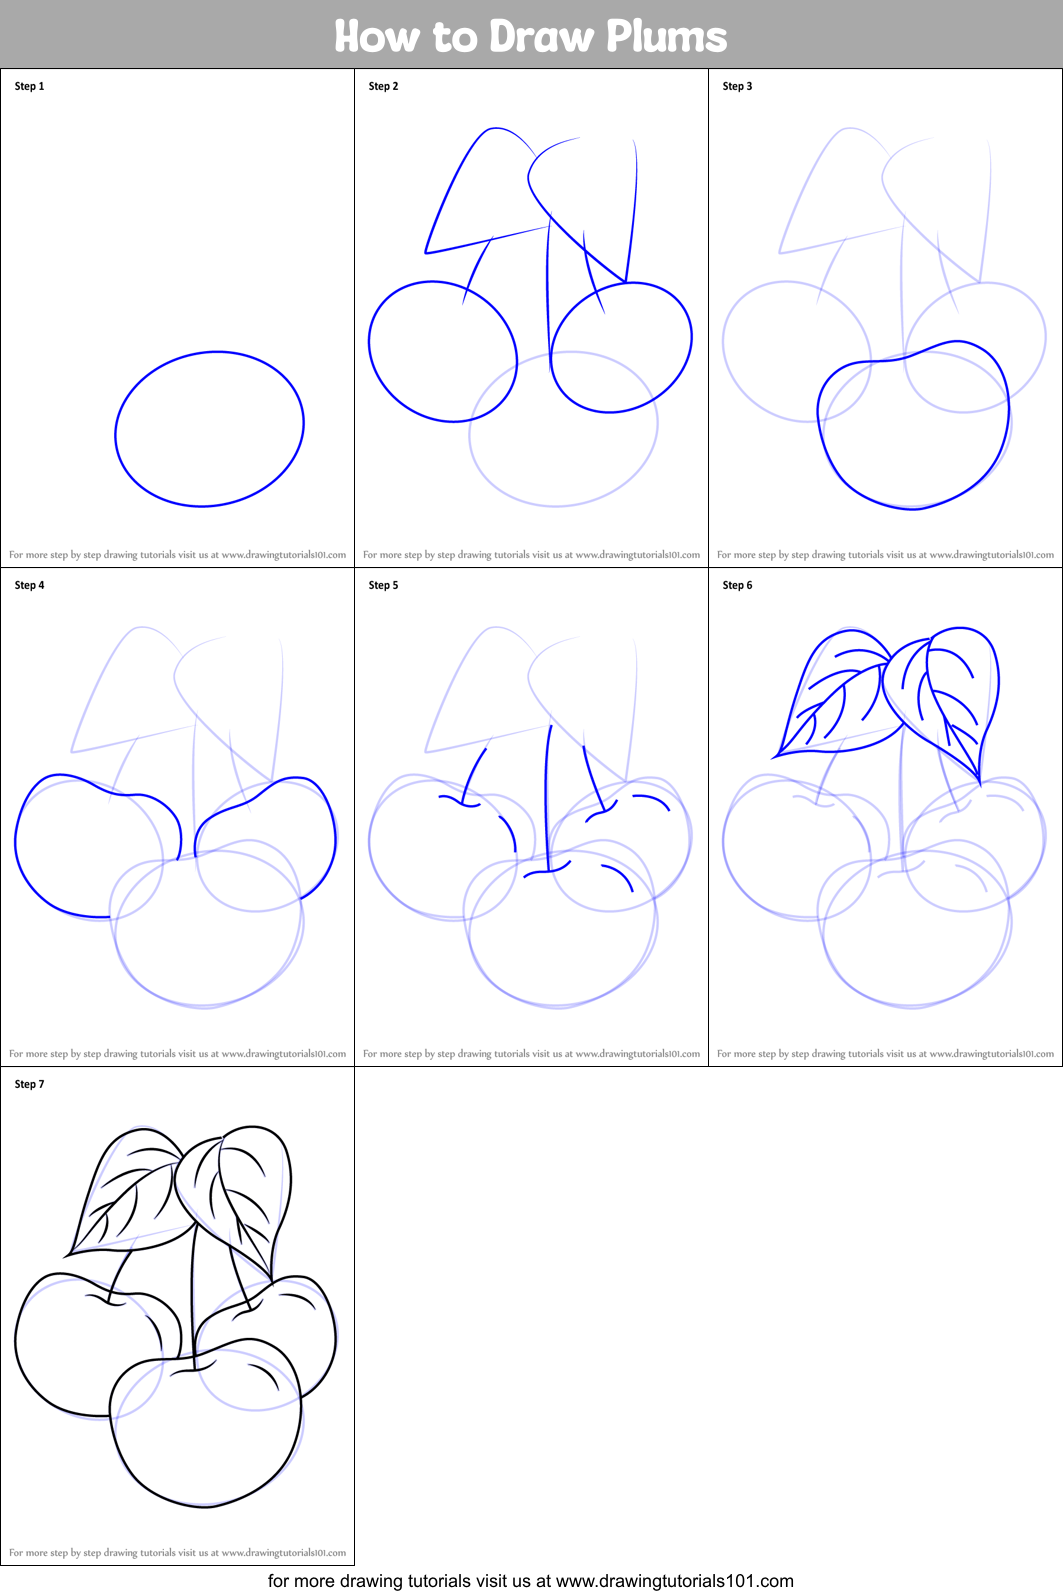 How to Draw Plums (Fruits) Step by Step | DrawingTutorials101.com